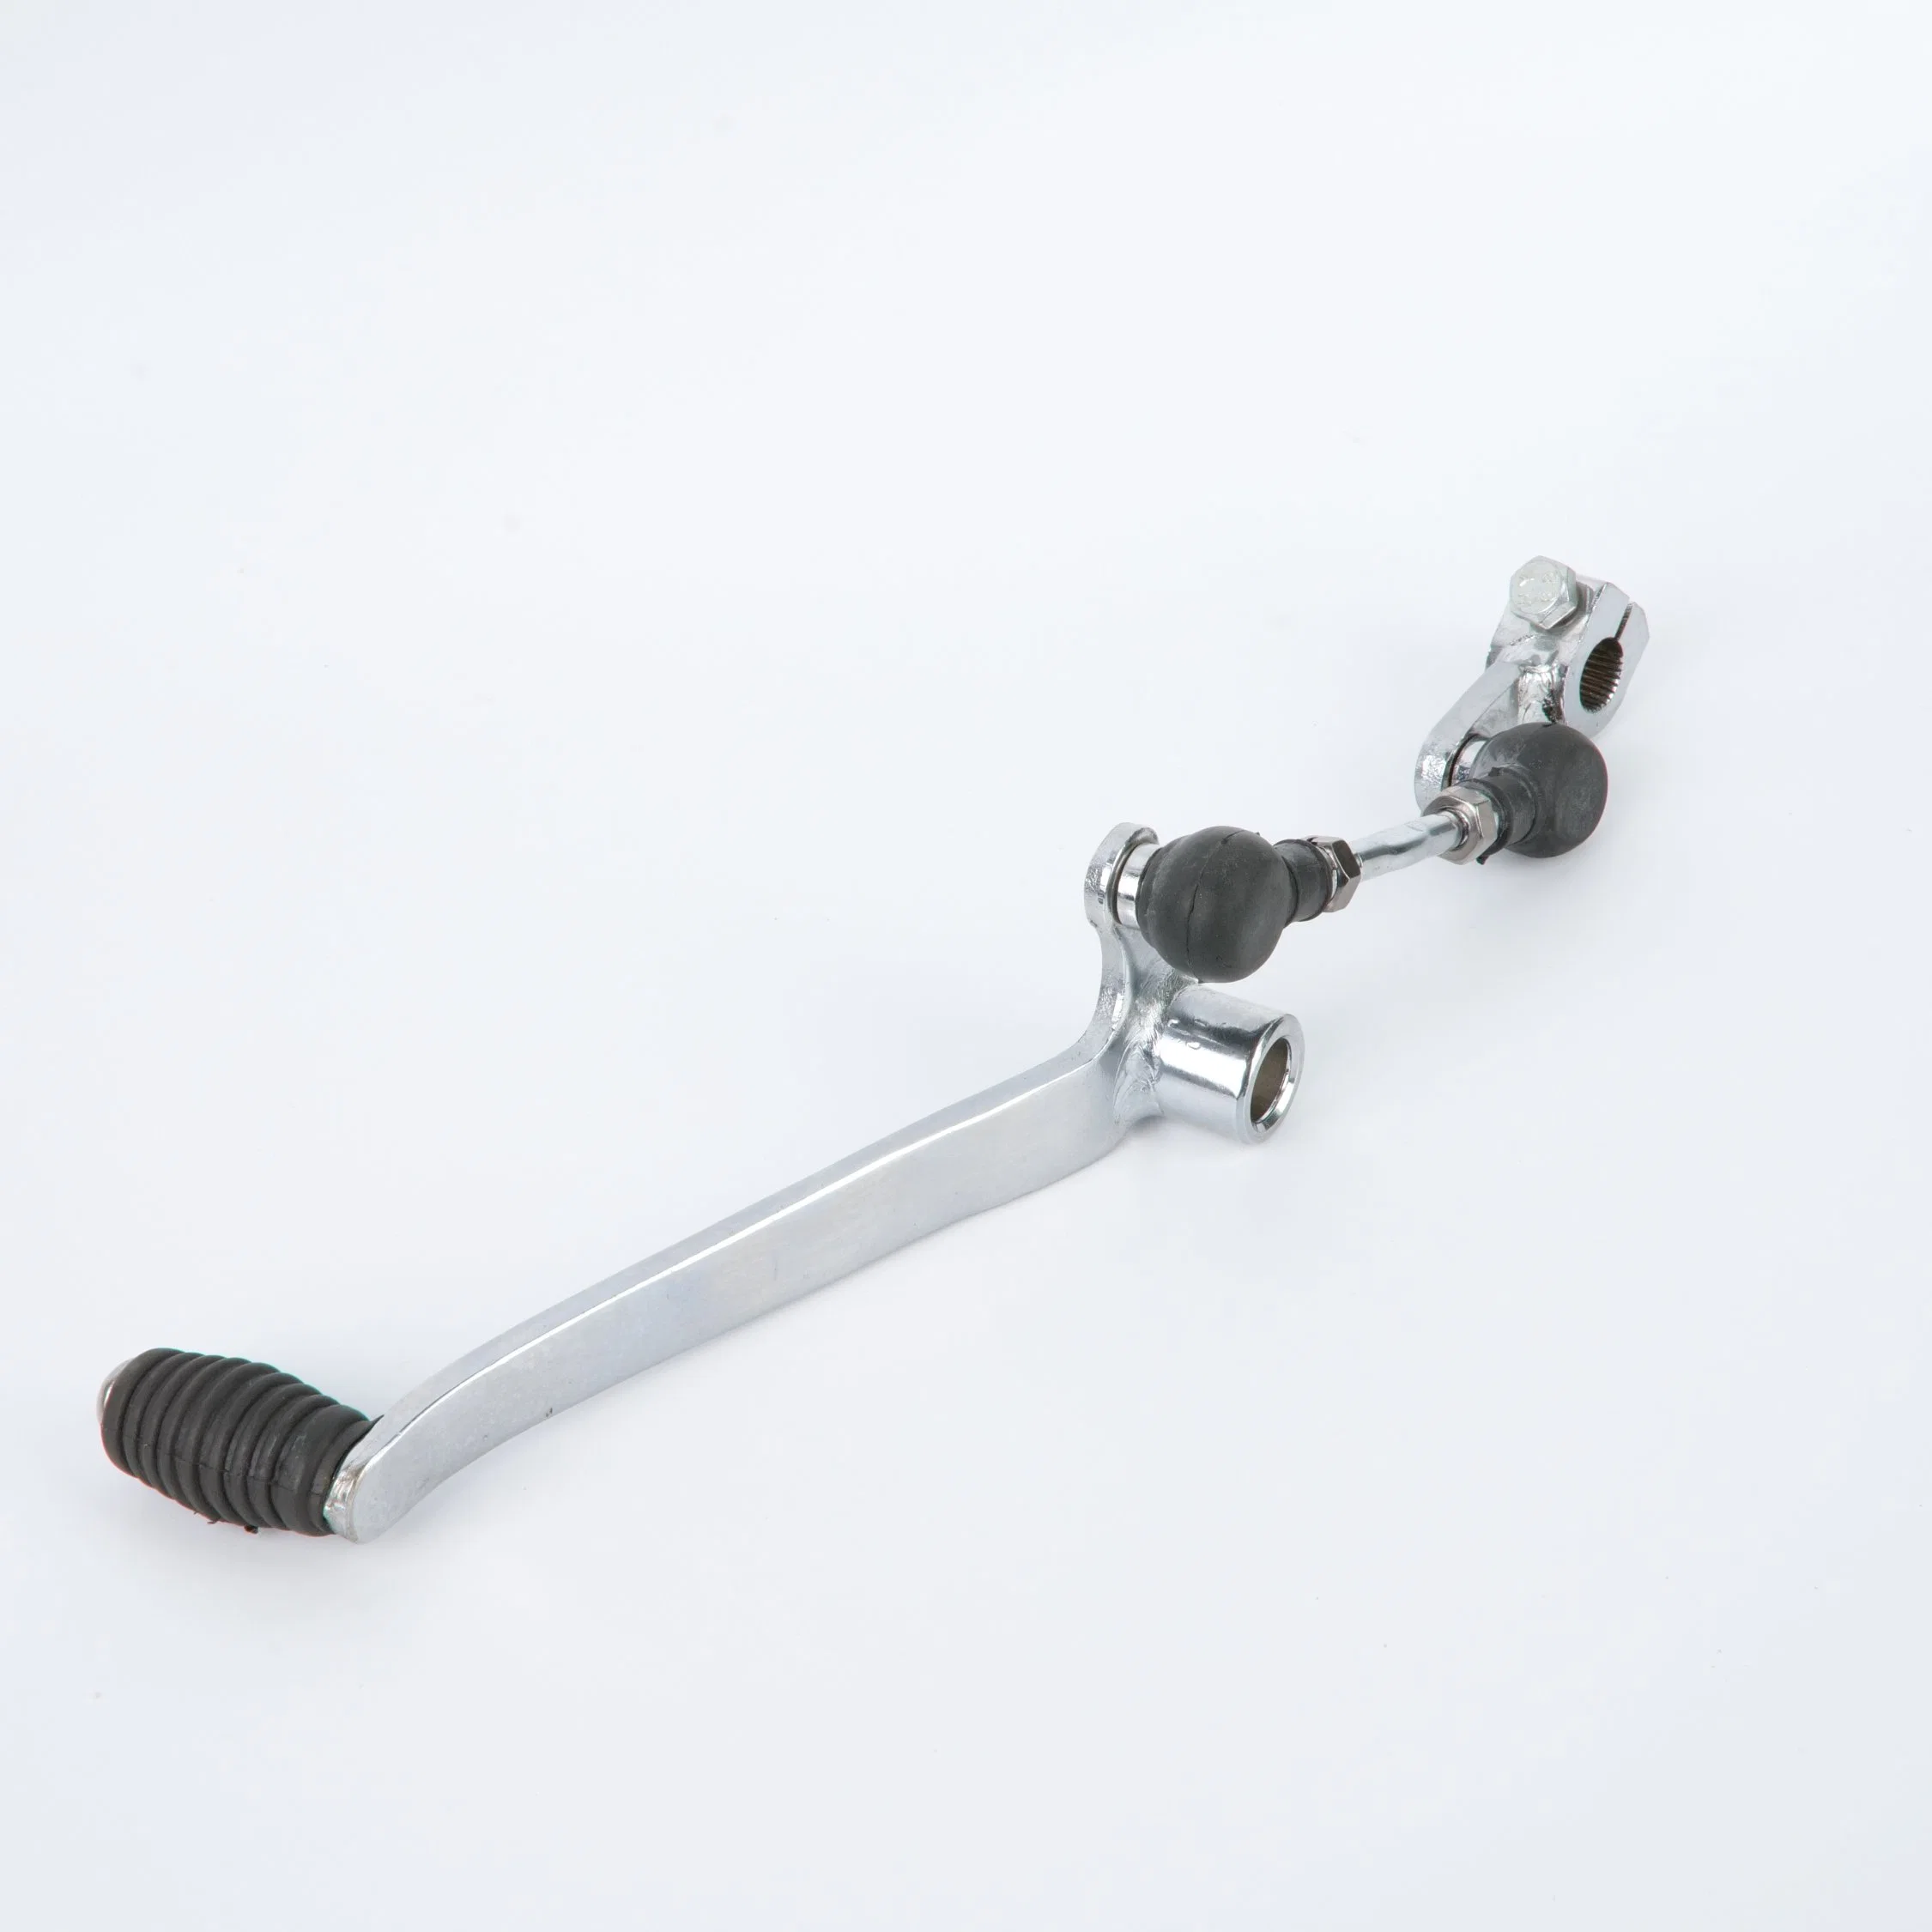 Gngn125 Motorcycle Gear in Lever, Gear Shiftlever, Gear Shift Lever